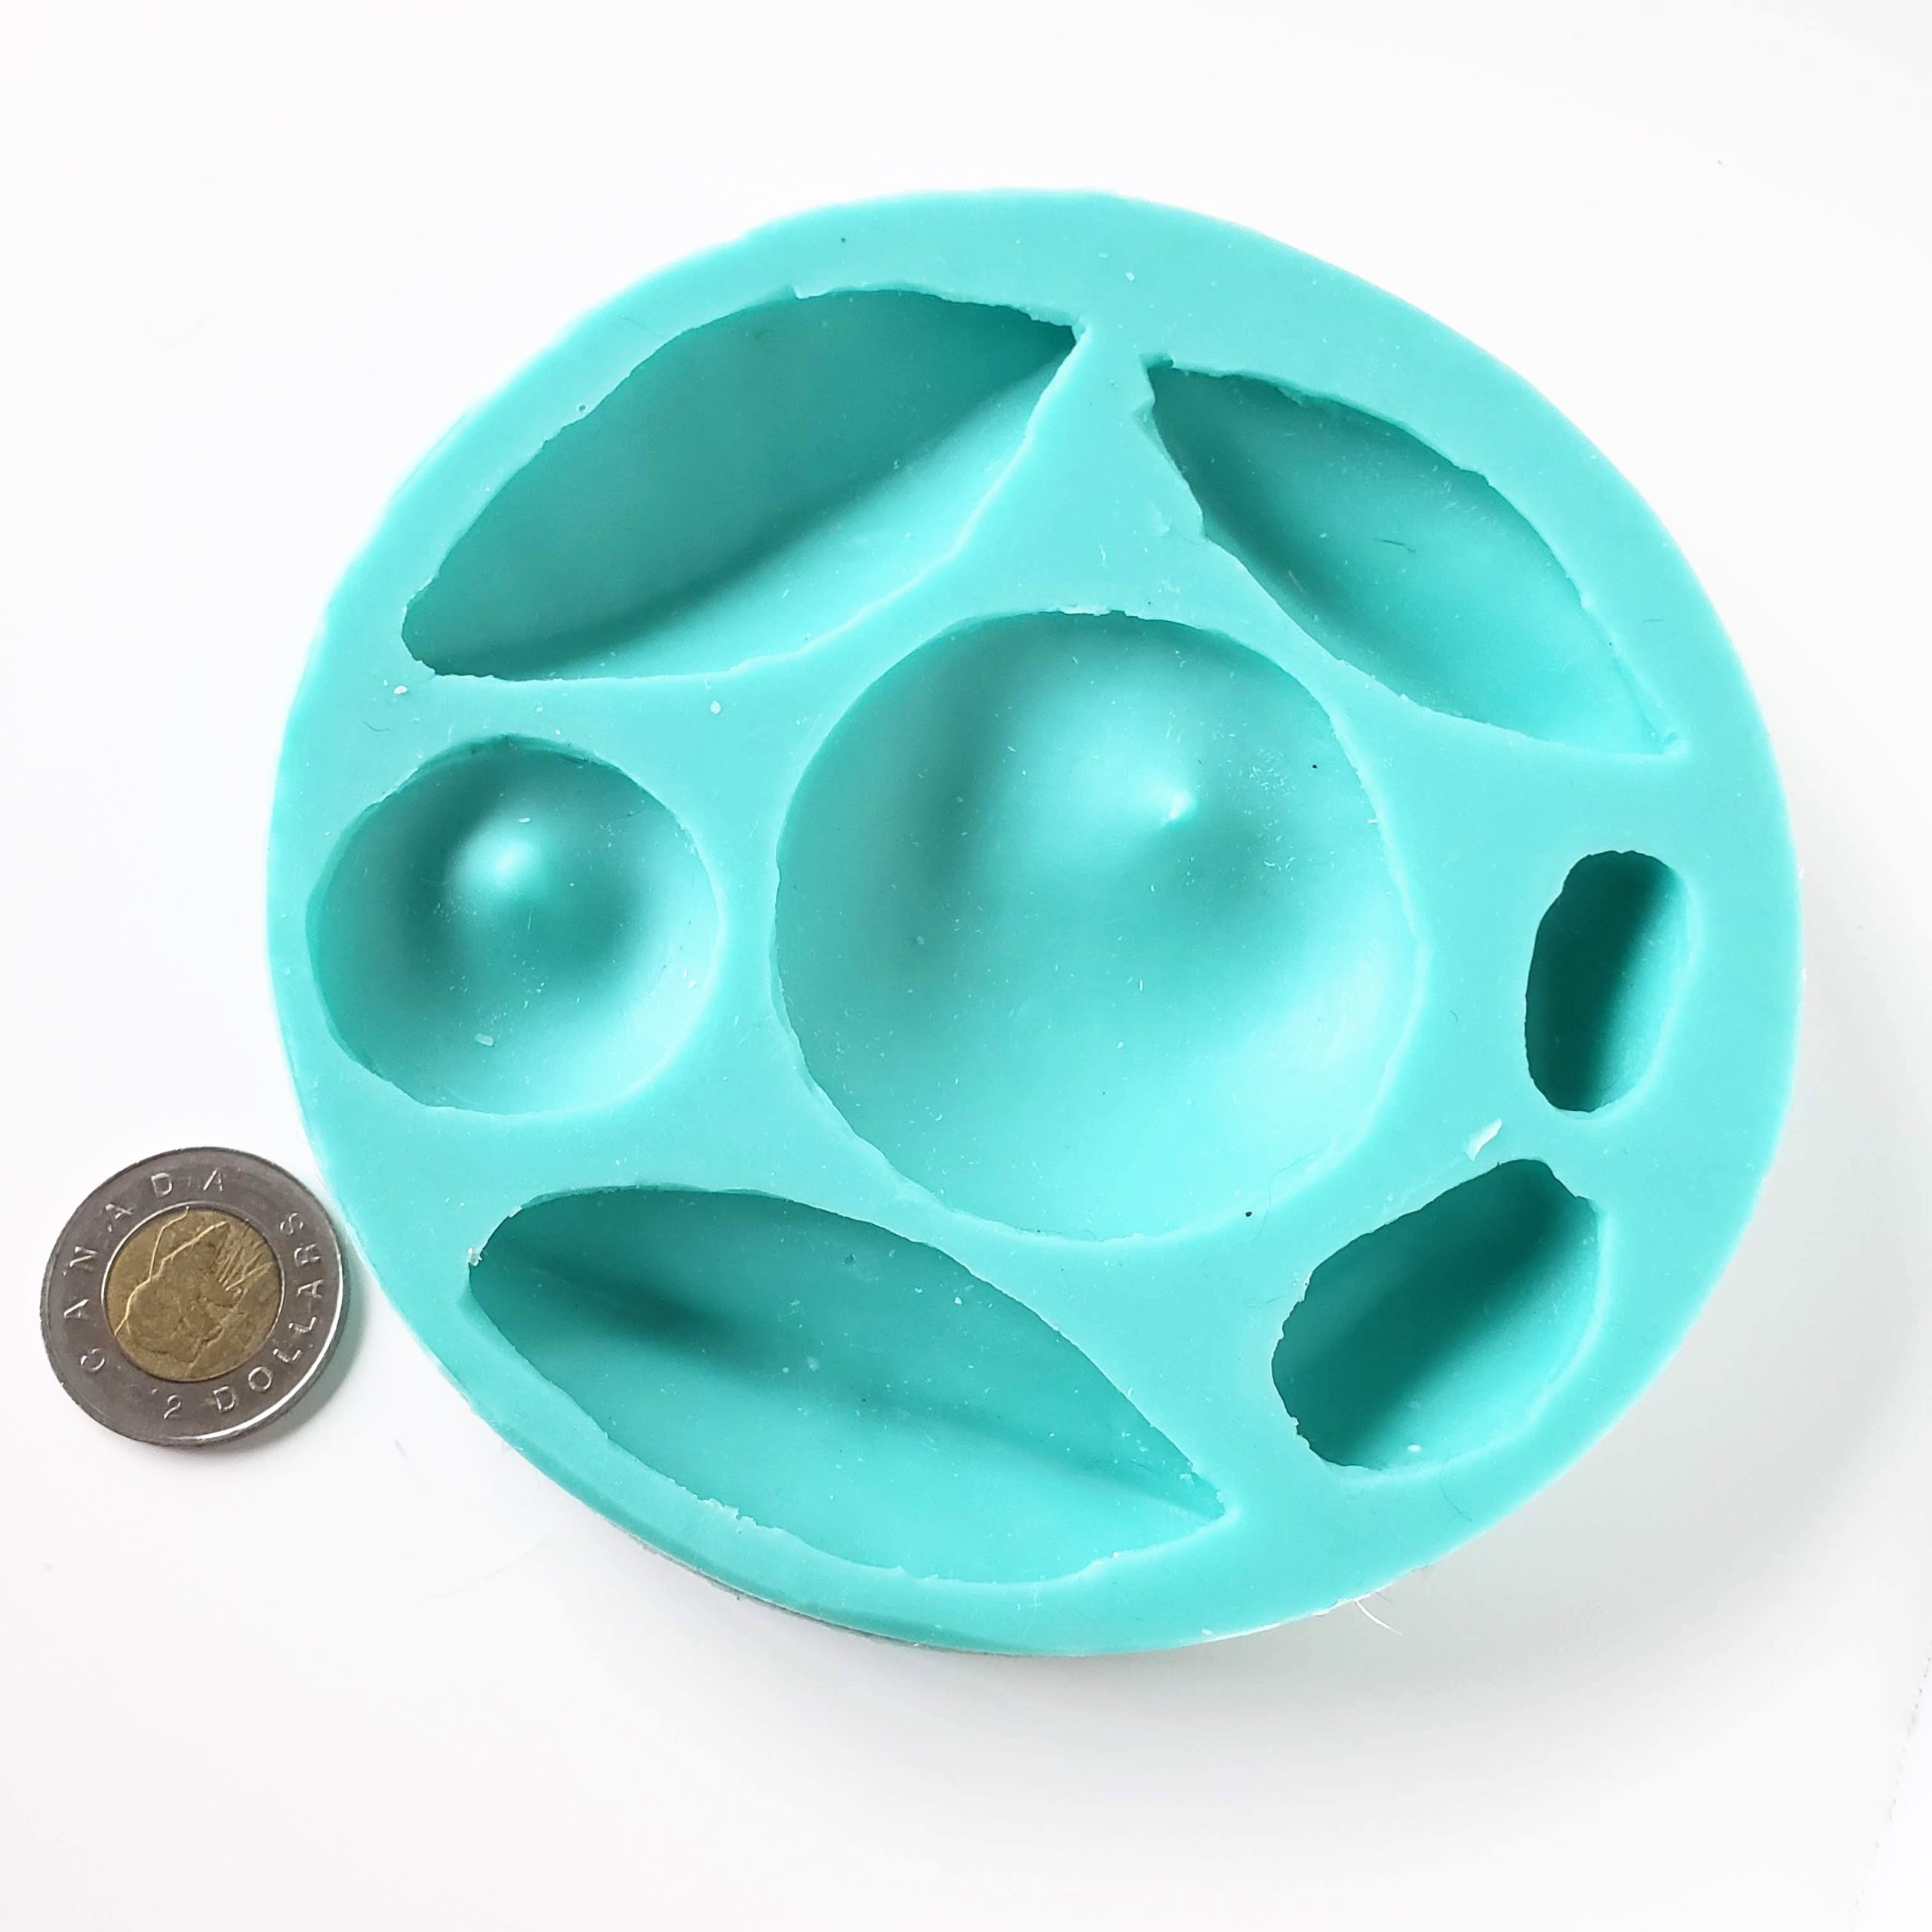 Flexible silicone bead molds for clay jewelry makers. Several designs in each mold. Can be used with resin.